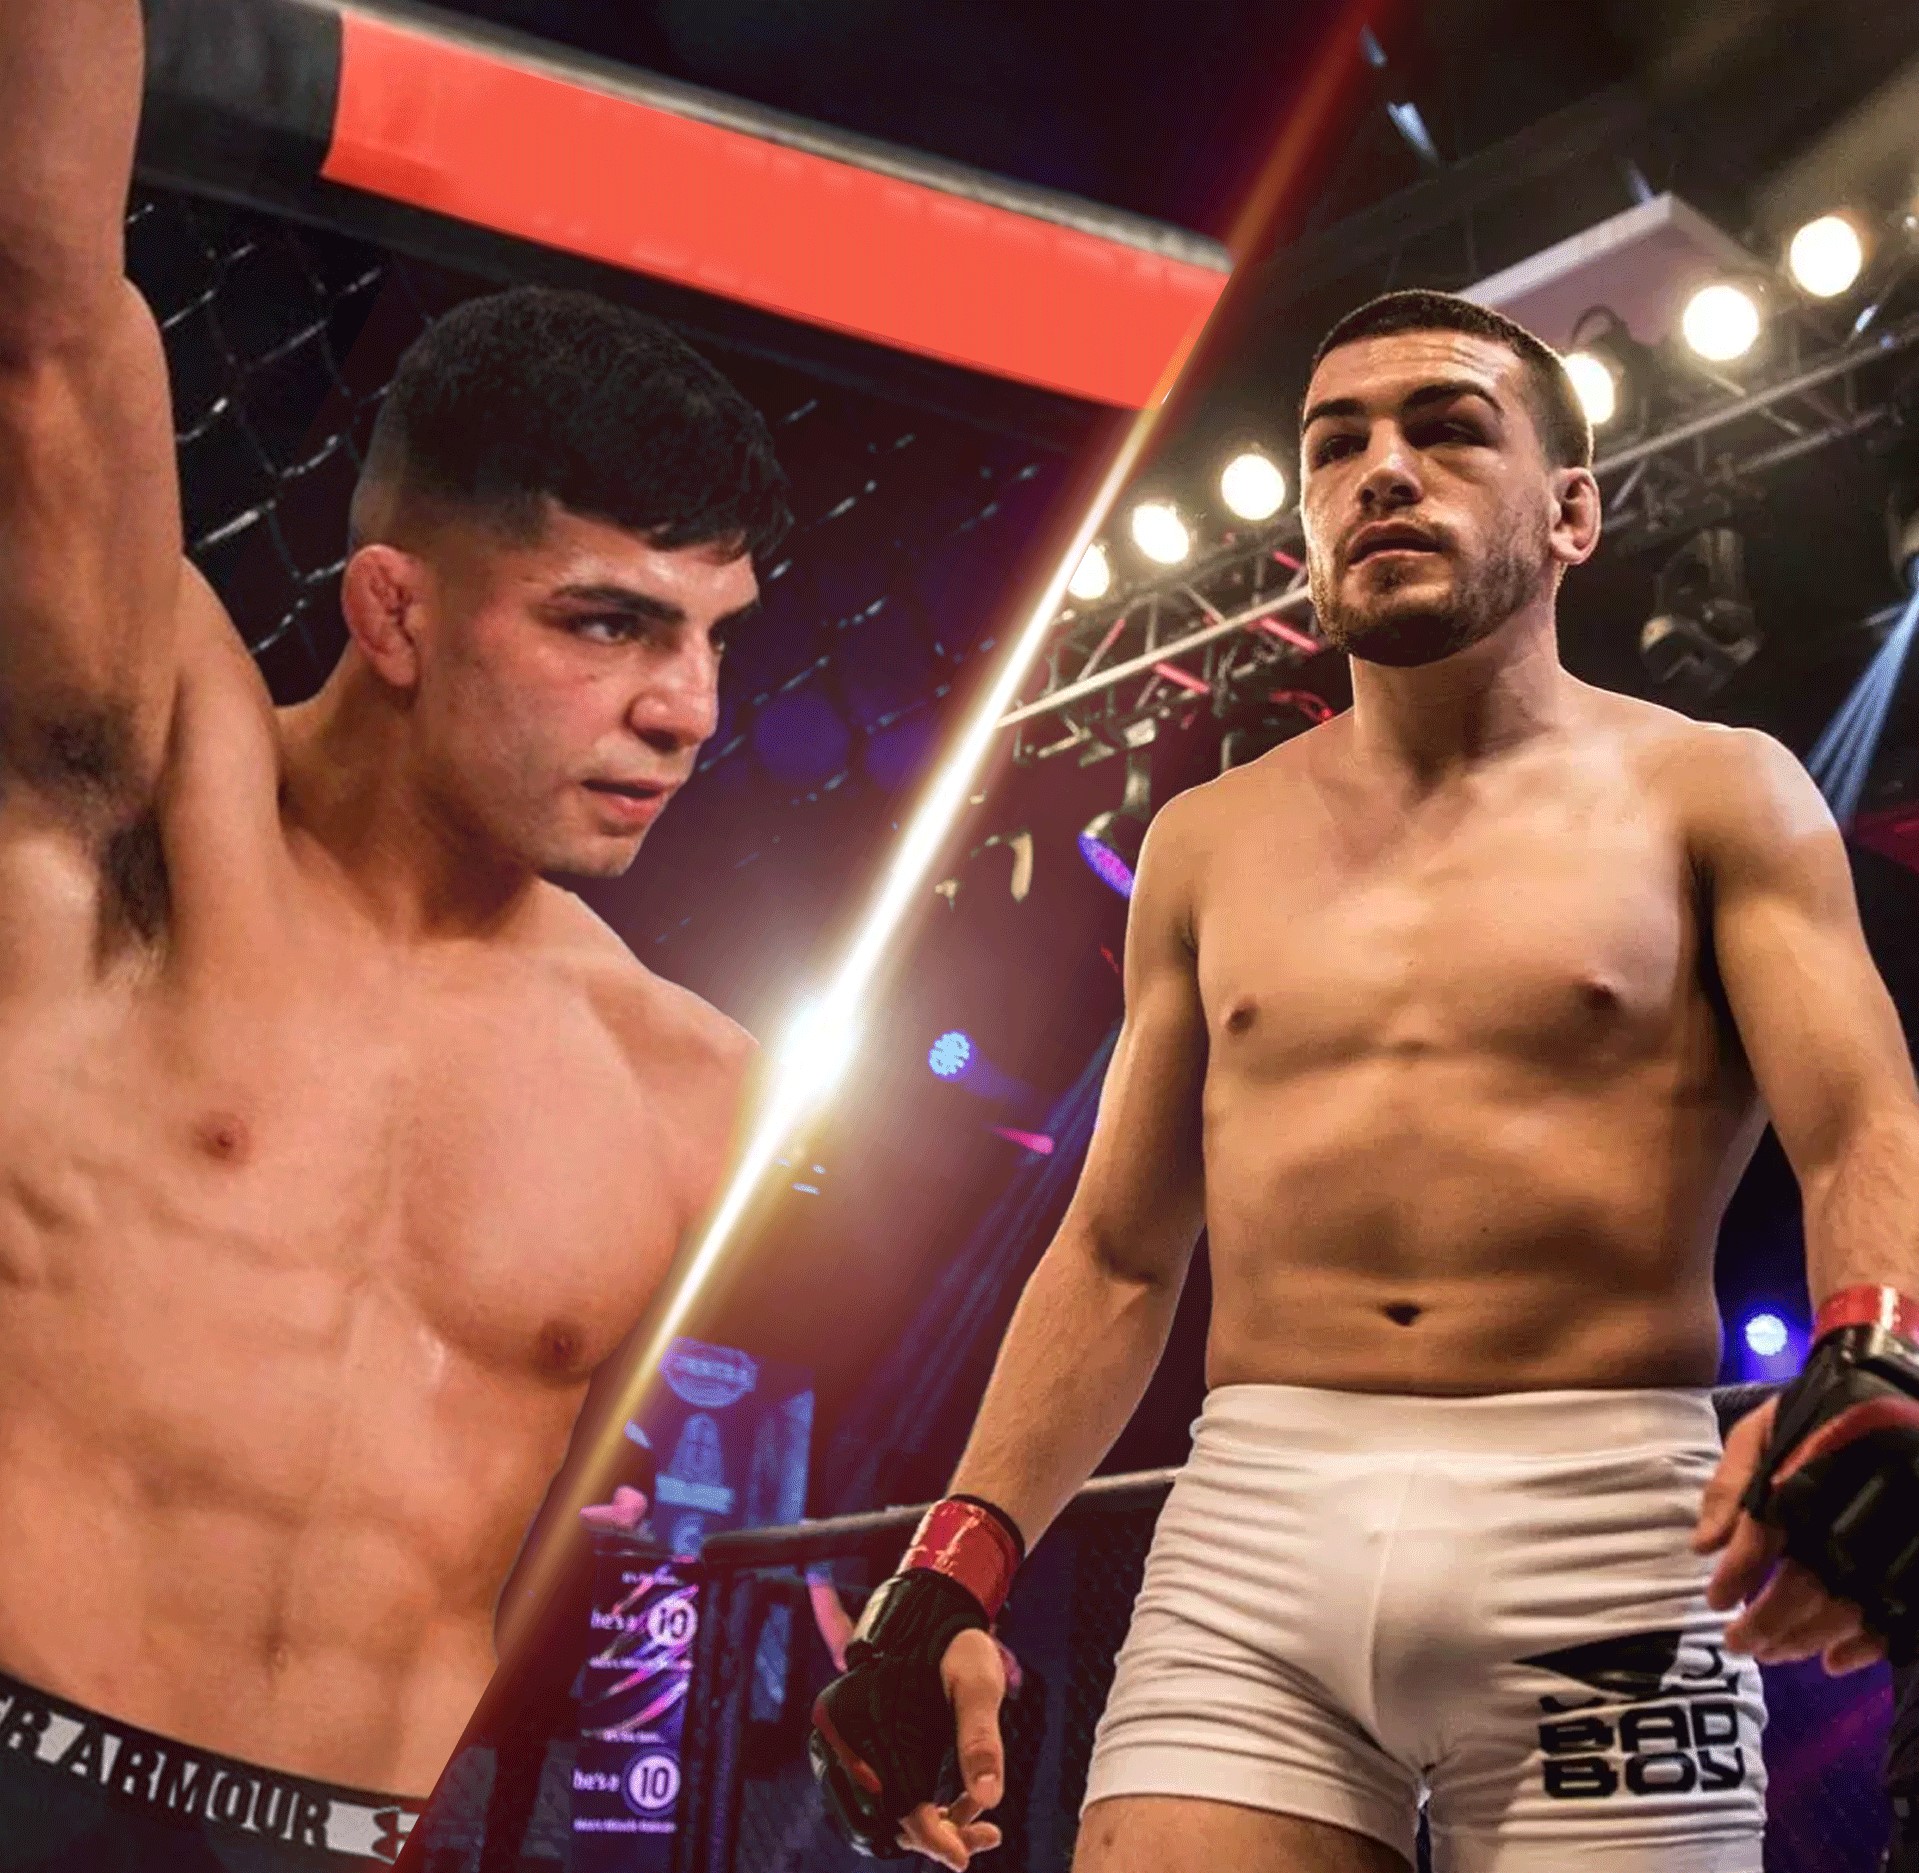 What to expect from Jose Torres against Amir Albazi at Brave 22 -